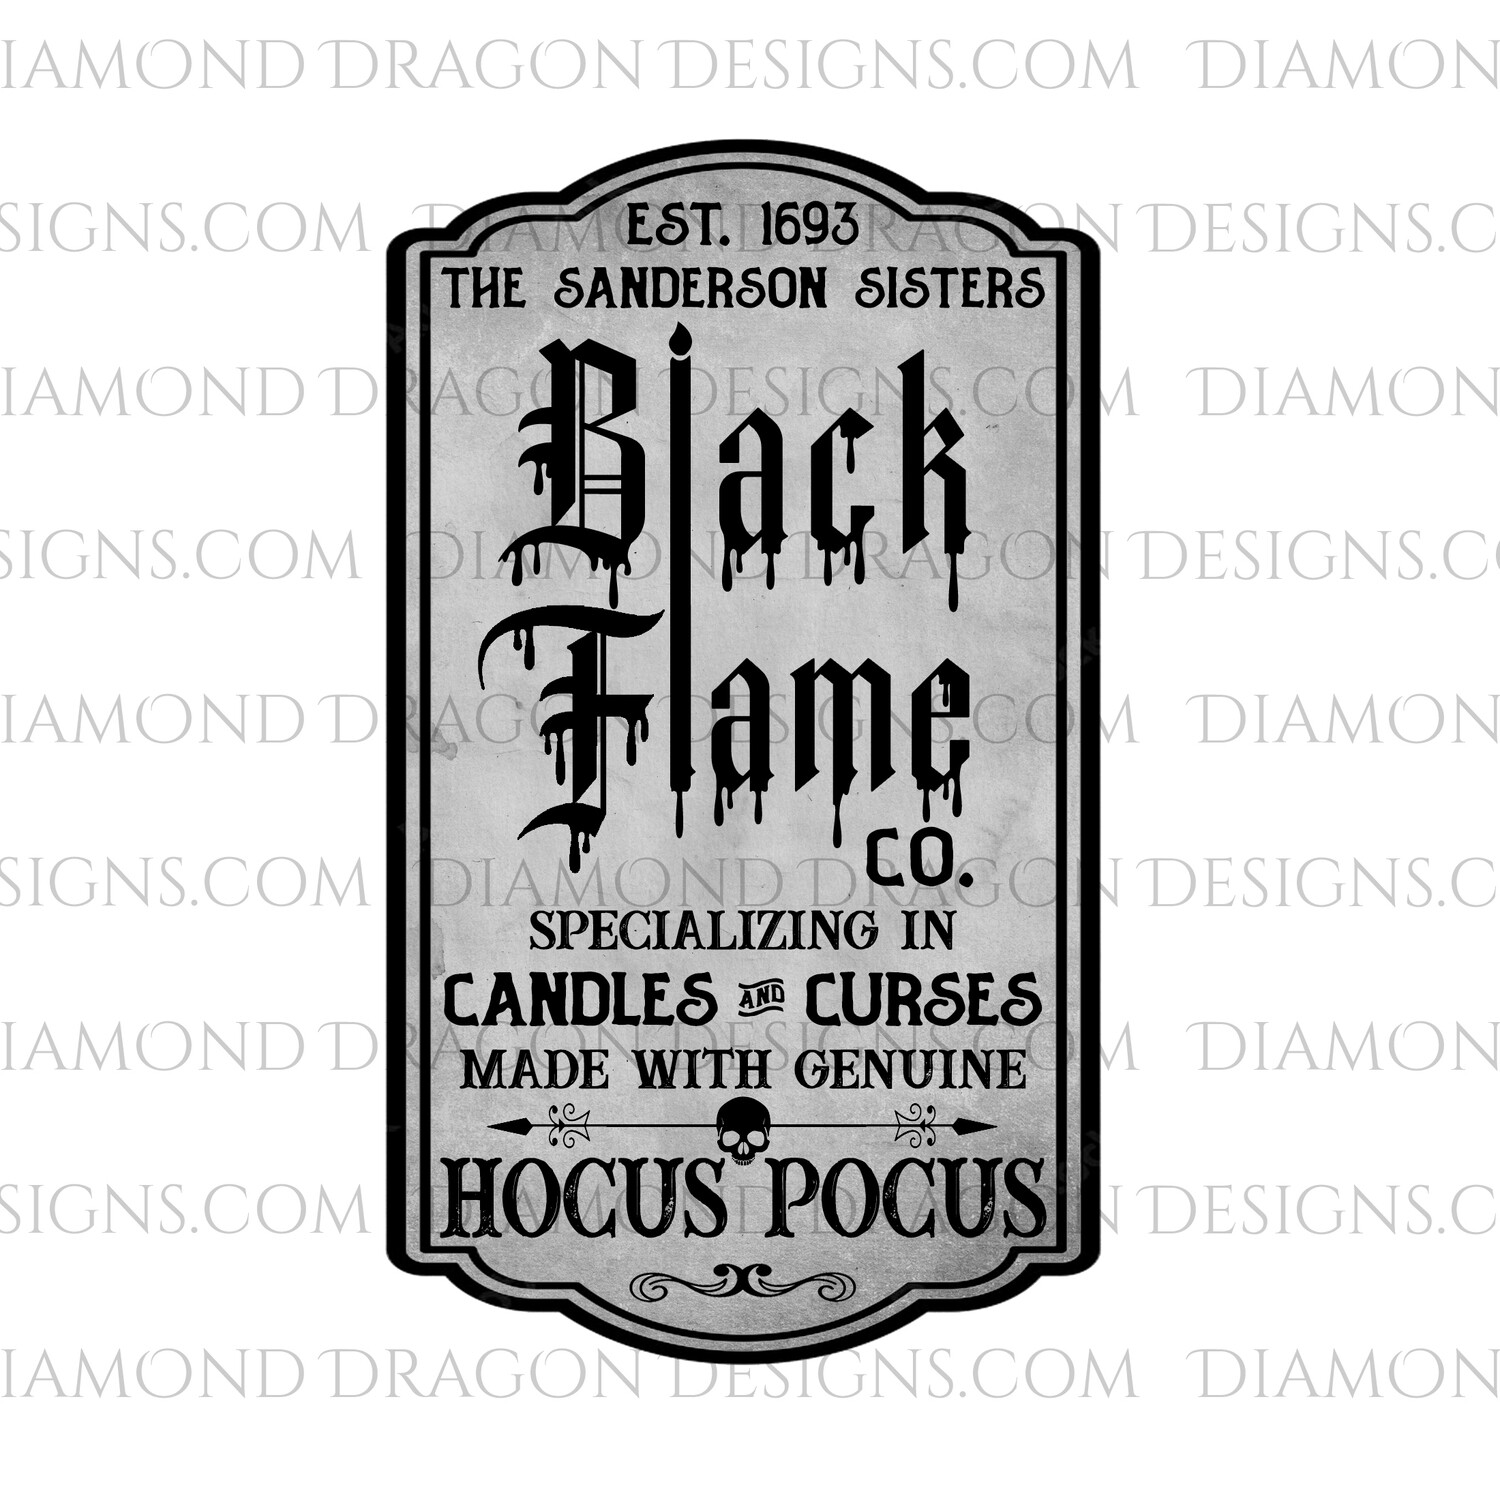 Halloween Black Flame Candle Label for Tumblers, Image File, Instant